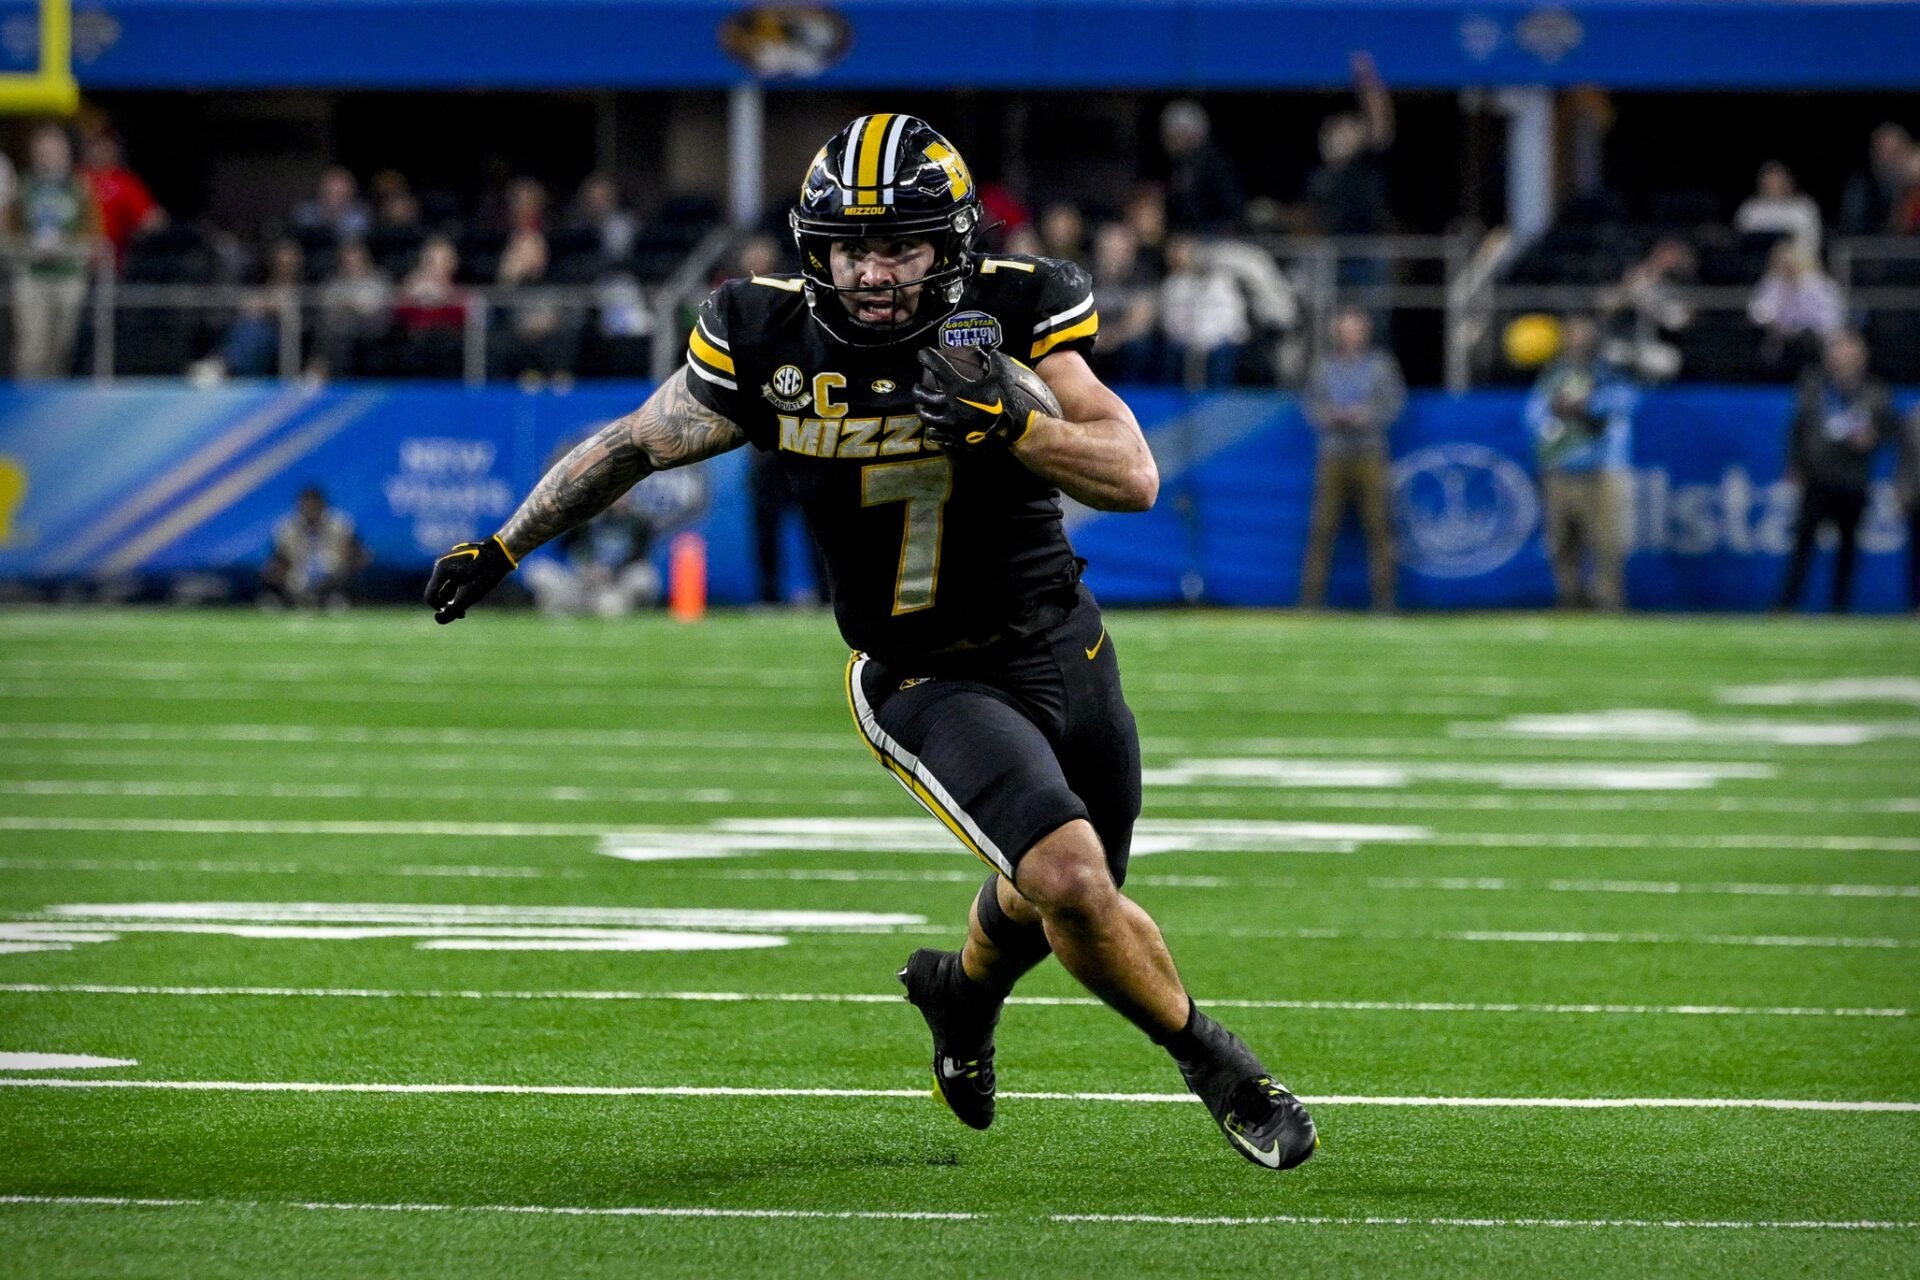 Missouri Tigers running back Cody Schrader (7) runs for a first down against the Ohio State Buckeyes during the fourth quarter at AT&T Stadium.